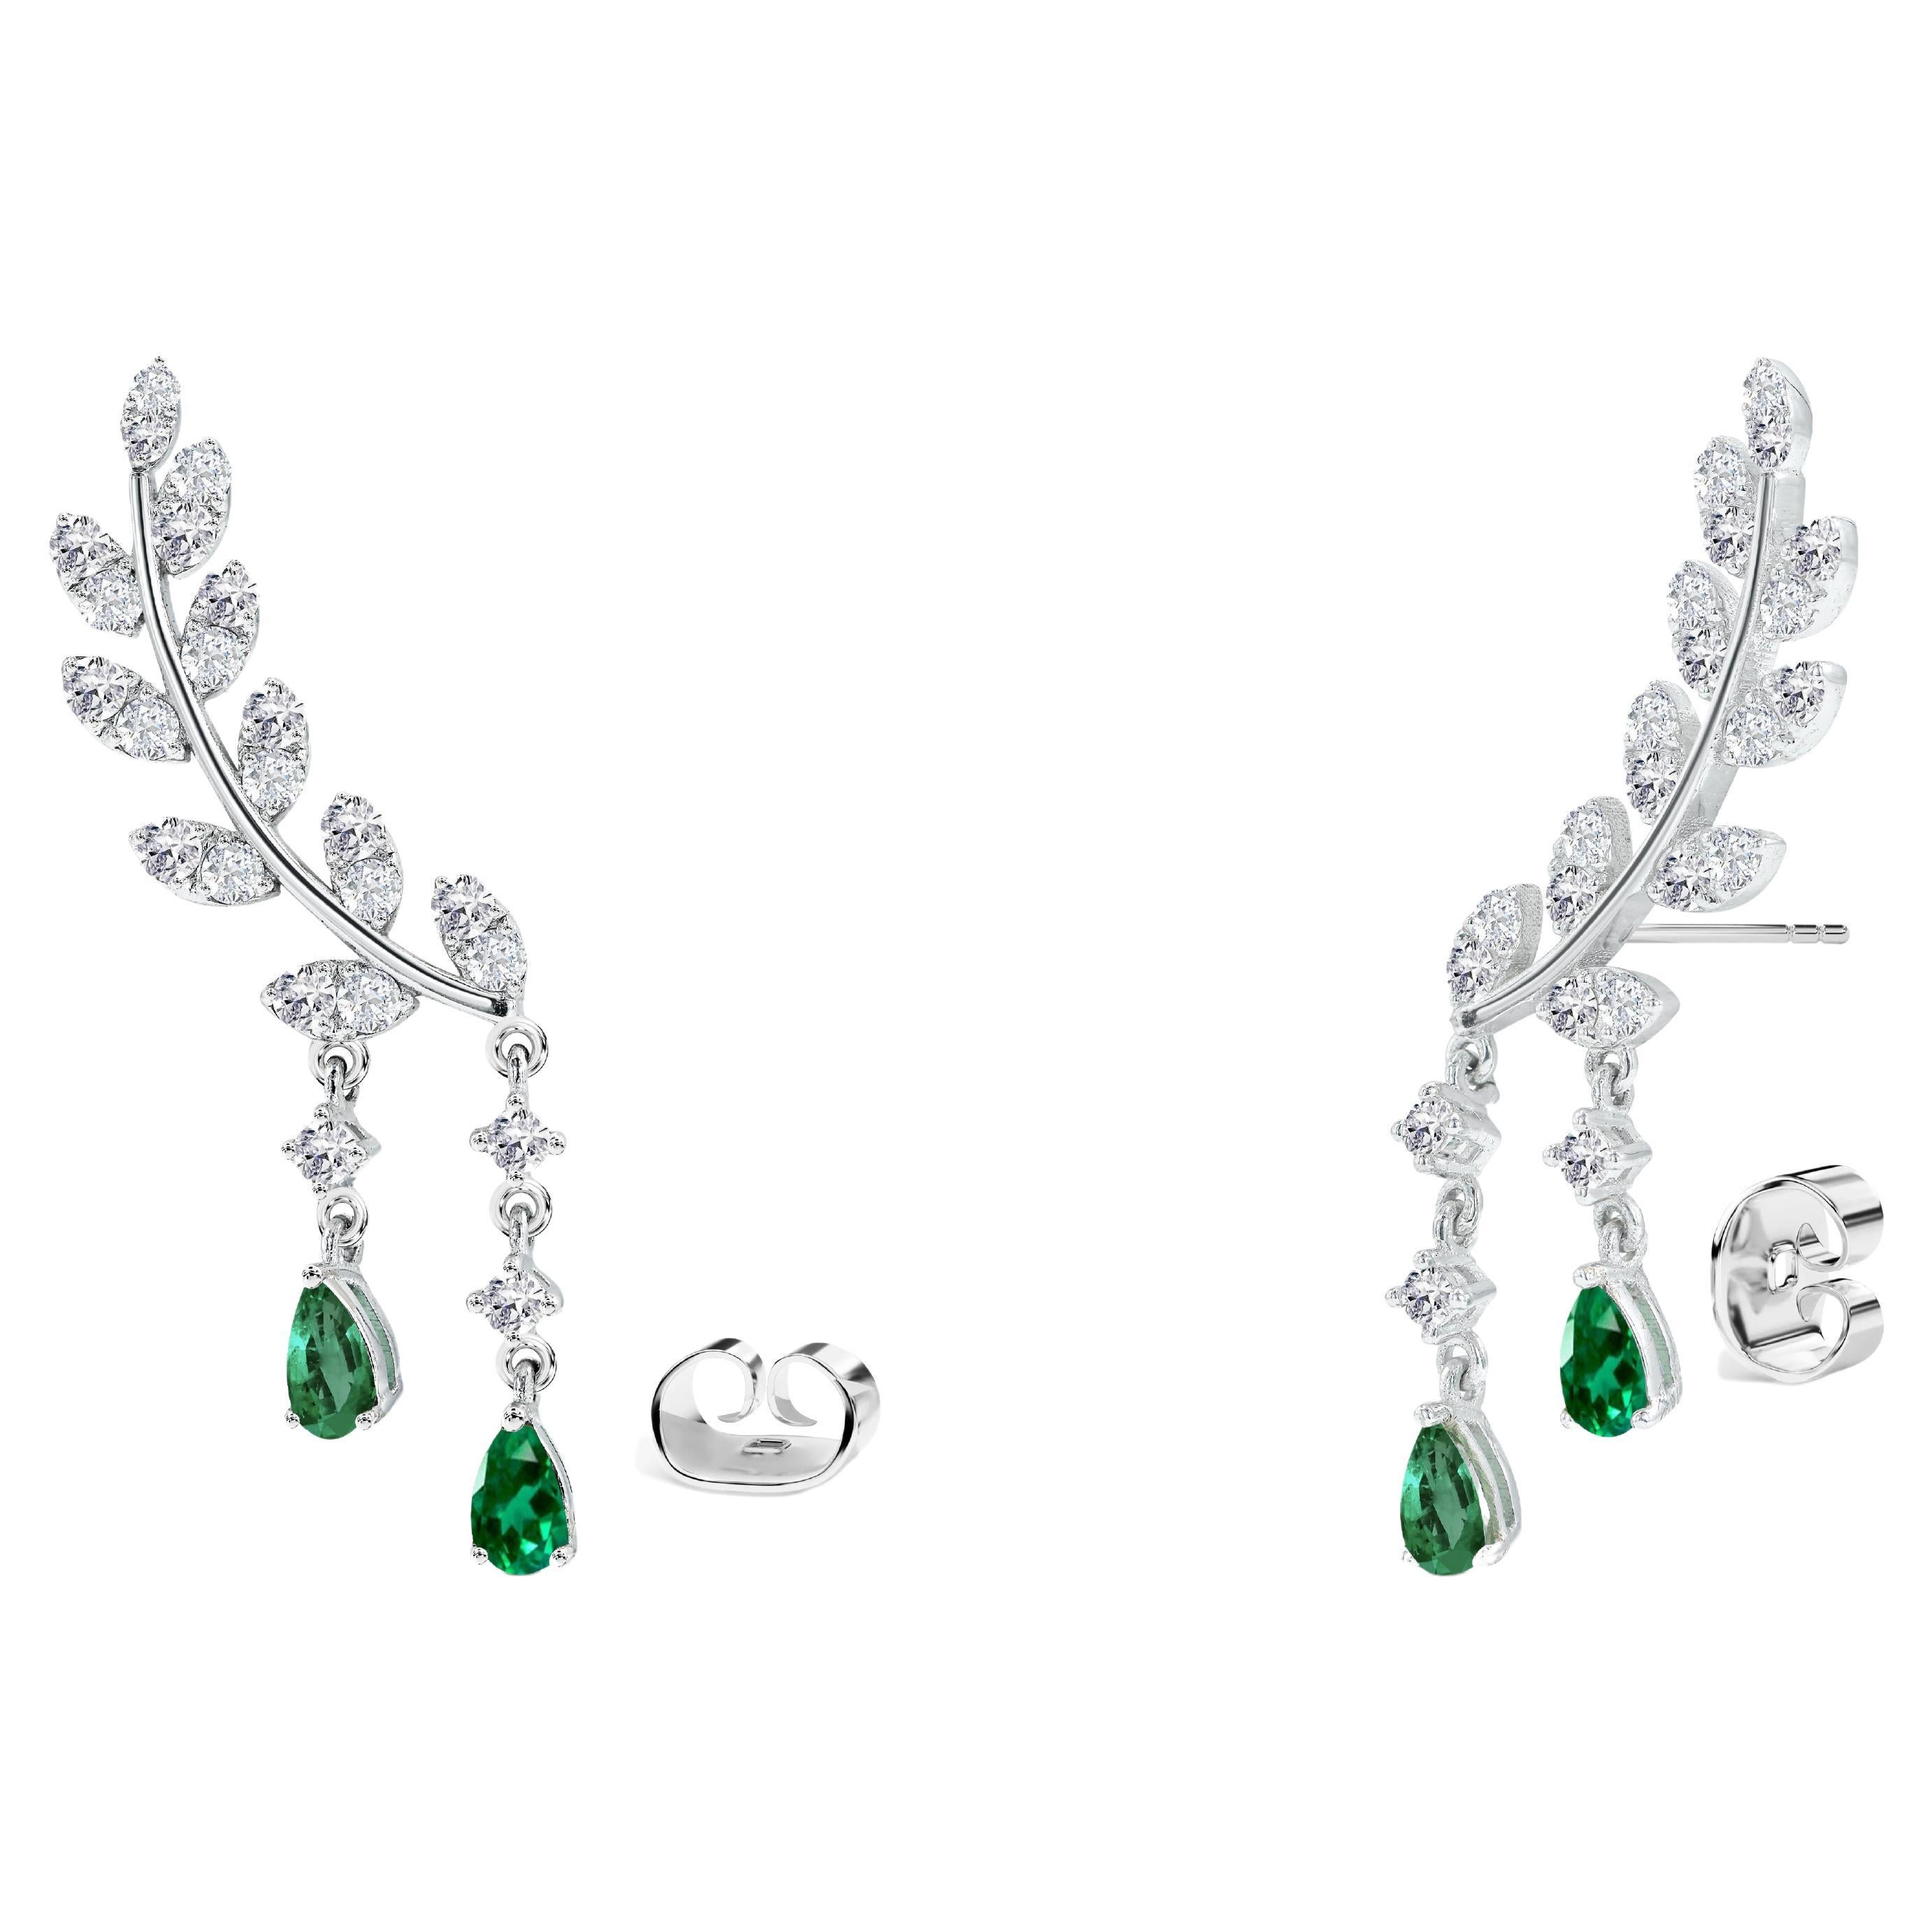 2.25ct Diamond And Emerald Leaf Drop Earrings In 18k Gold Round Cut Diamond For Sale